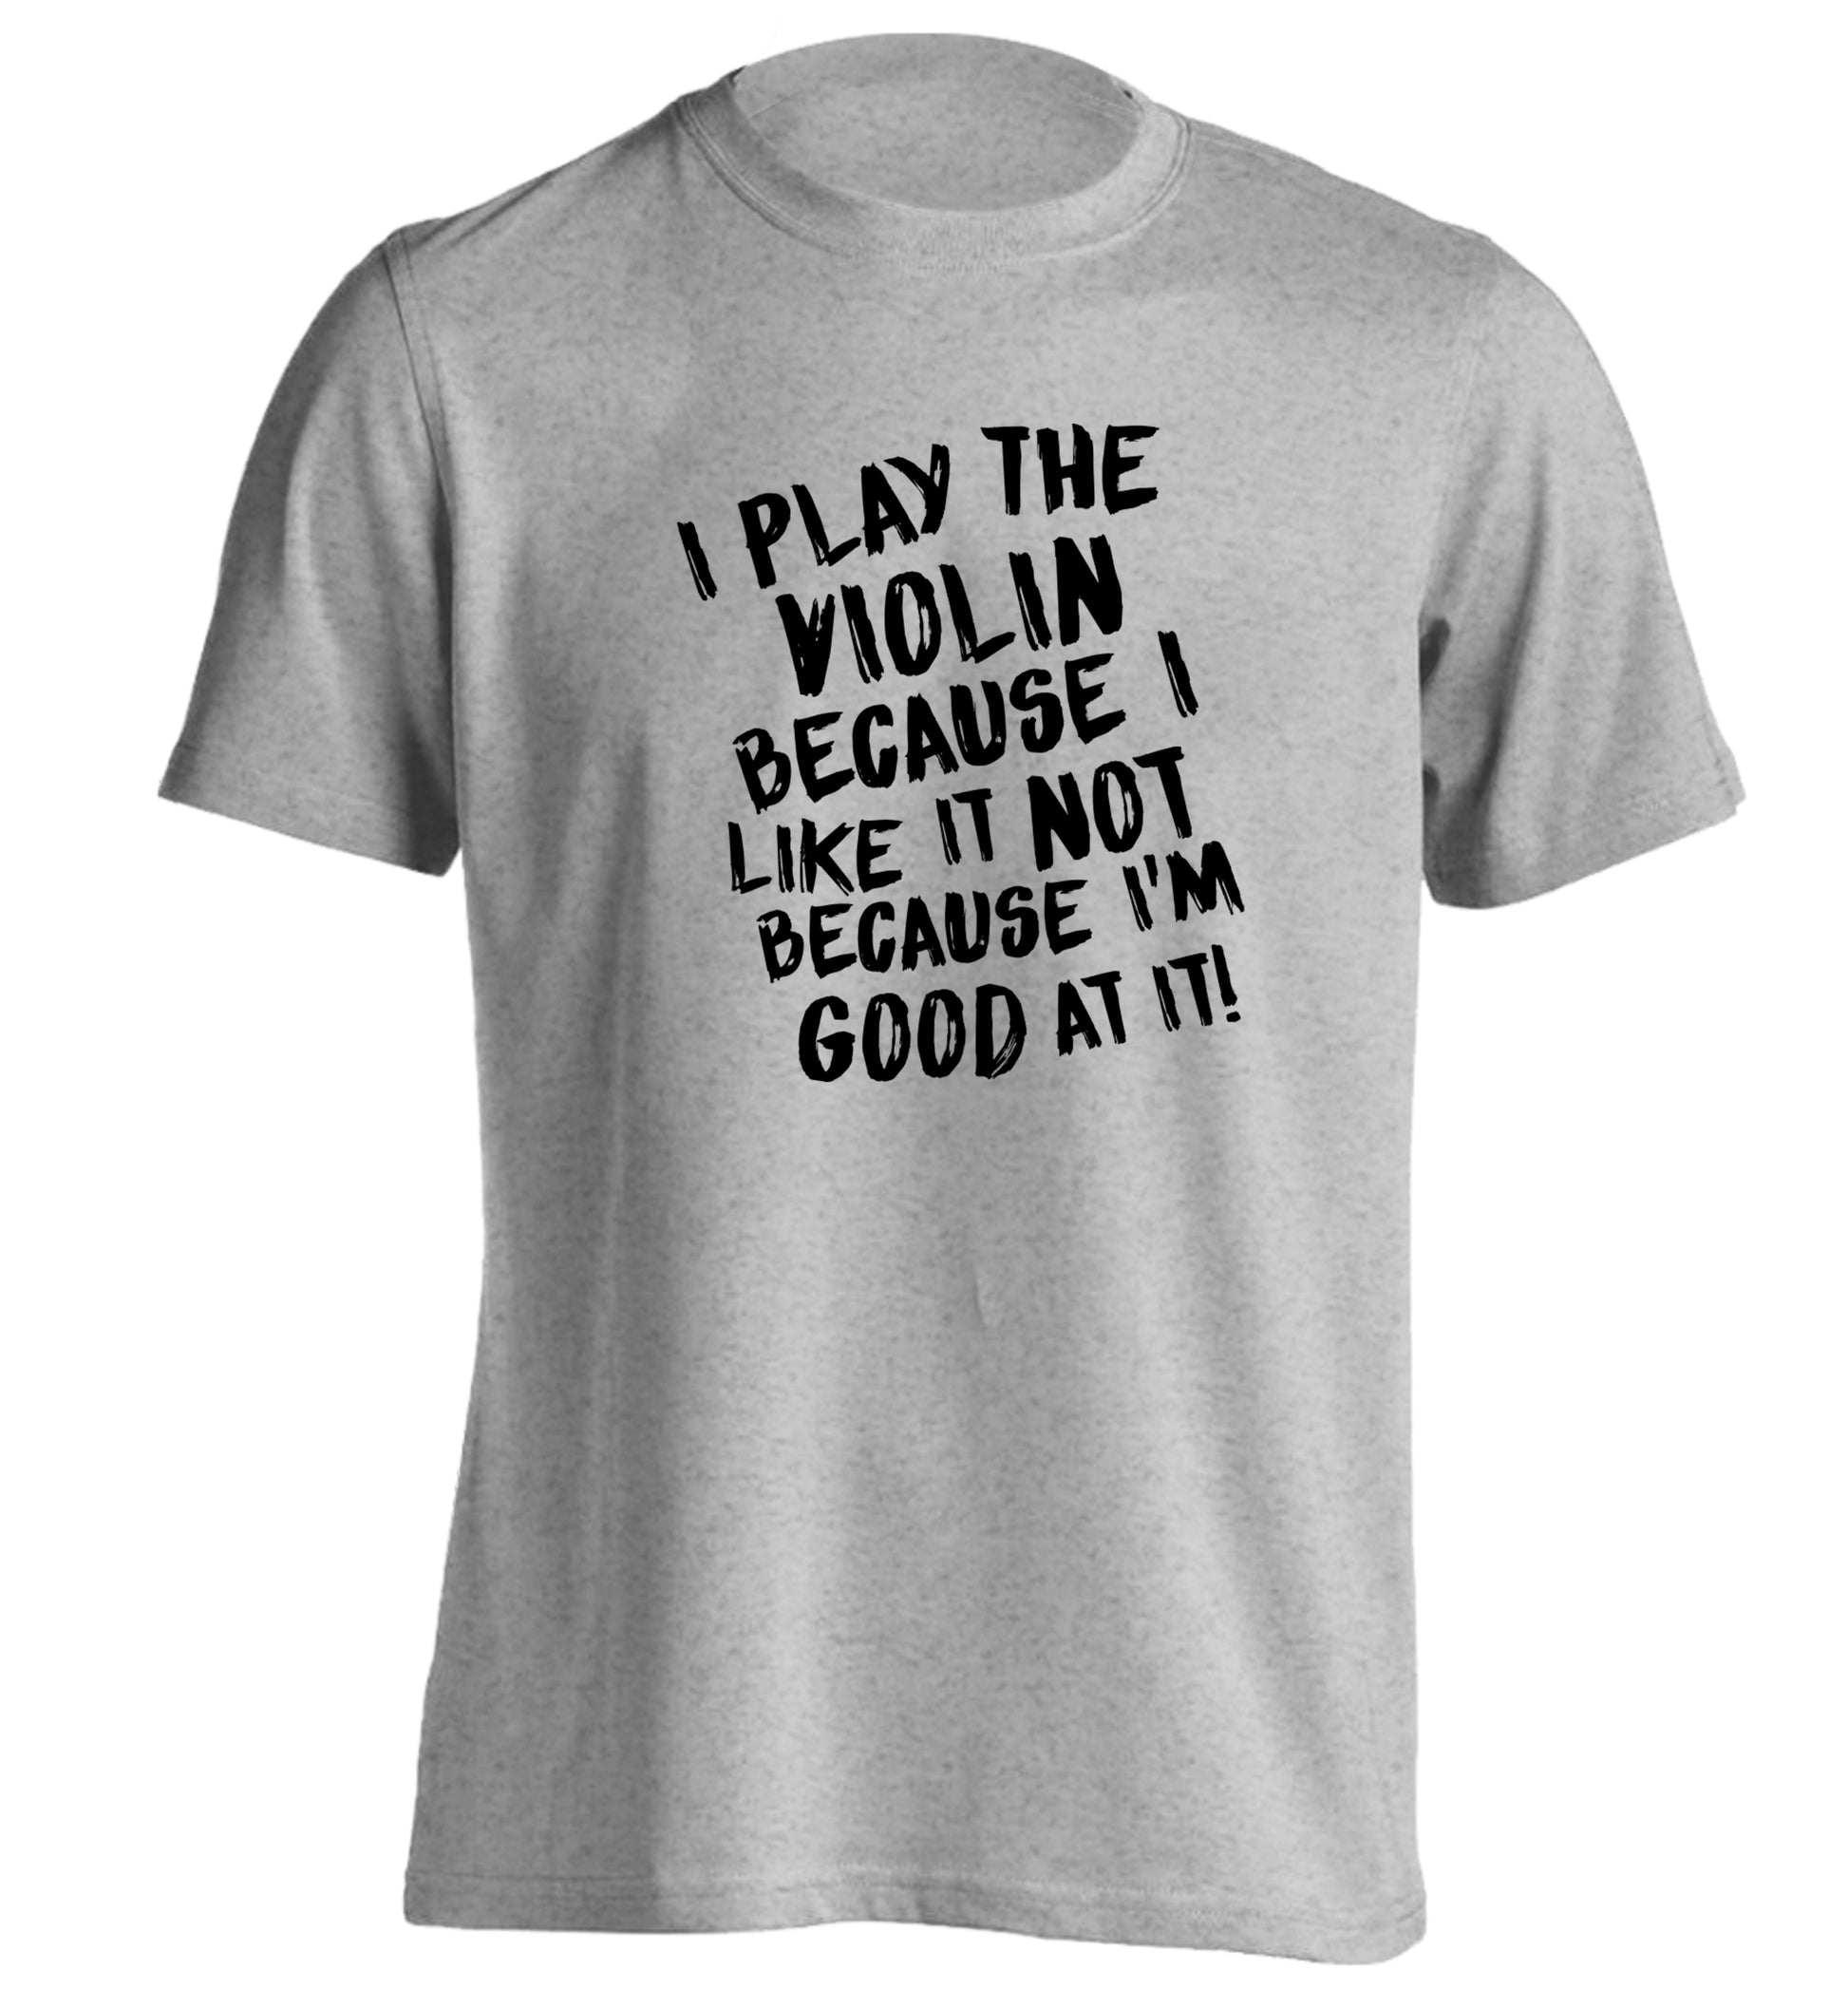 I play the violin because I like it not because I'm good at it adults unisex grey Tshirt 2XL